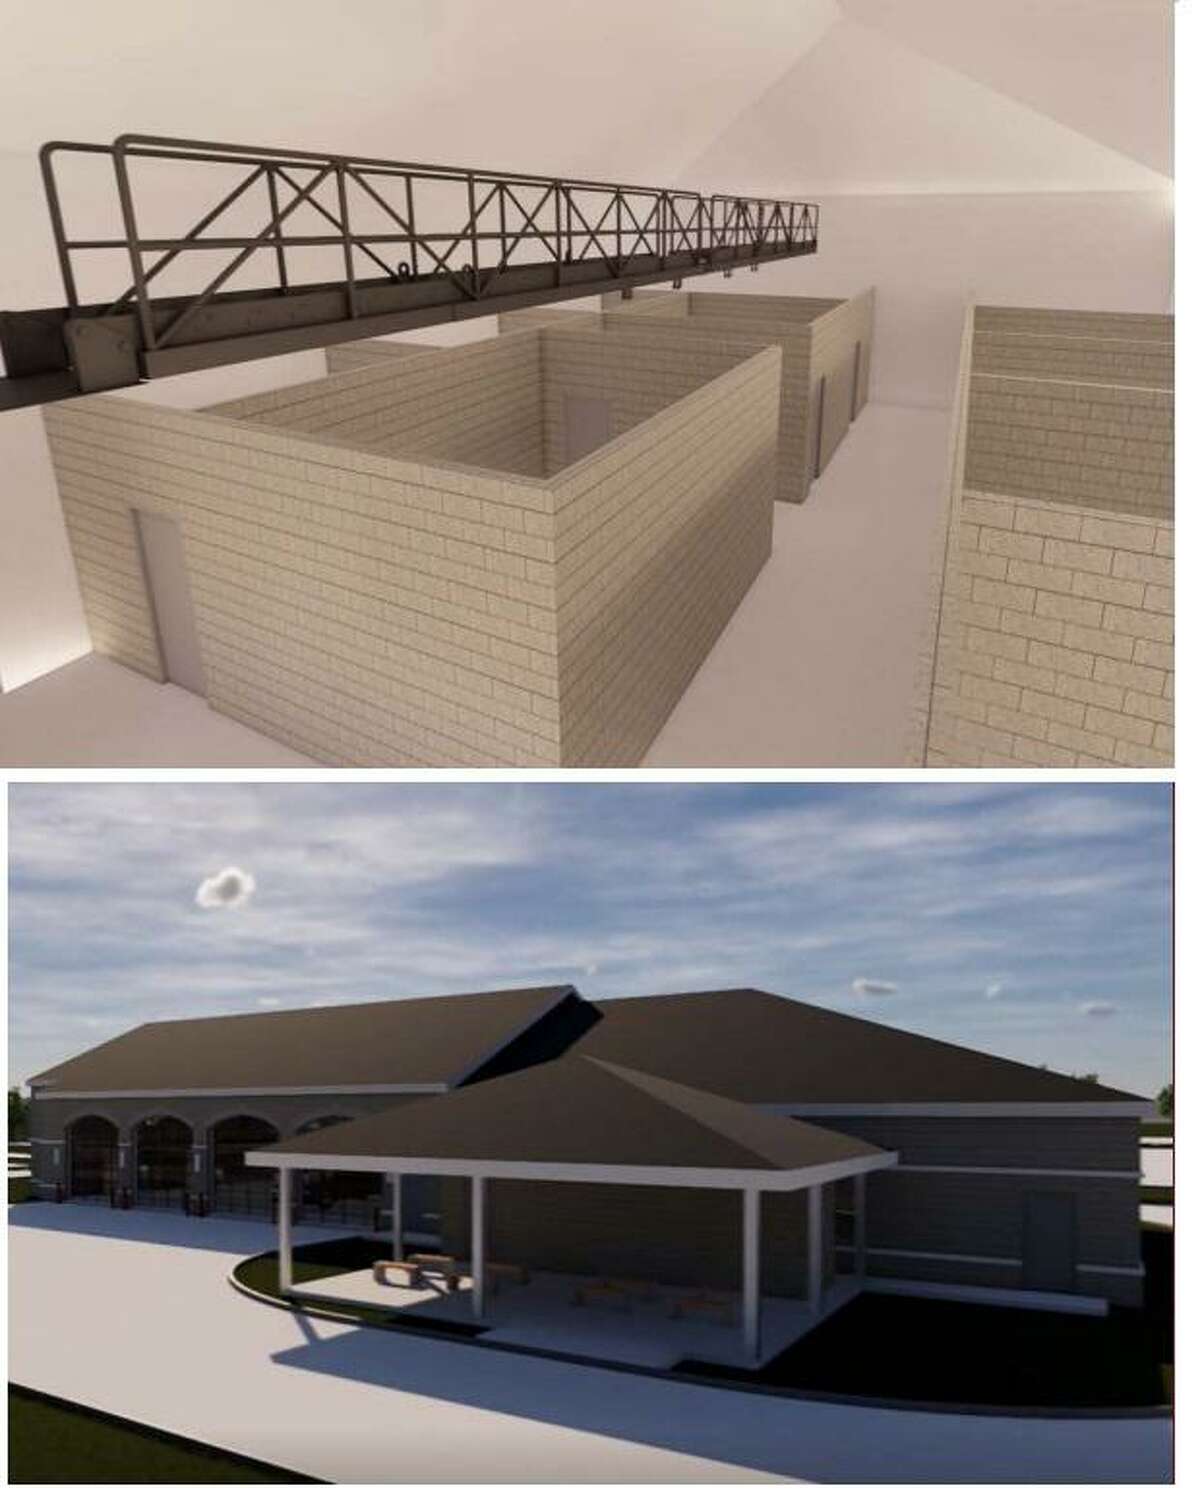 Phase 2 involves the construction of a simulation training building and an apparatus bay/classroom building.